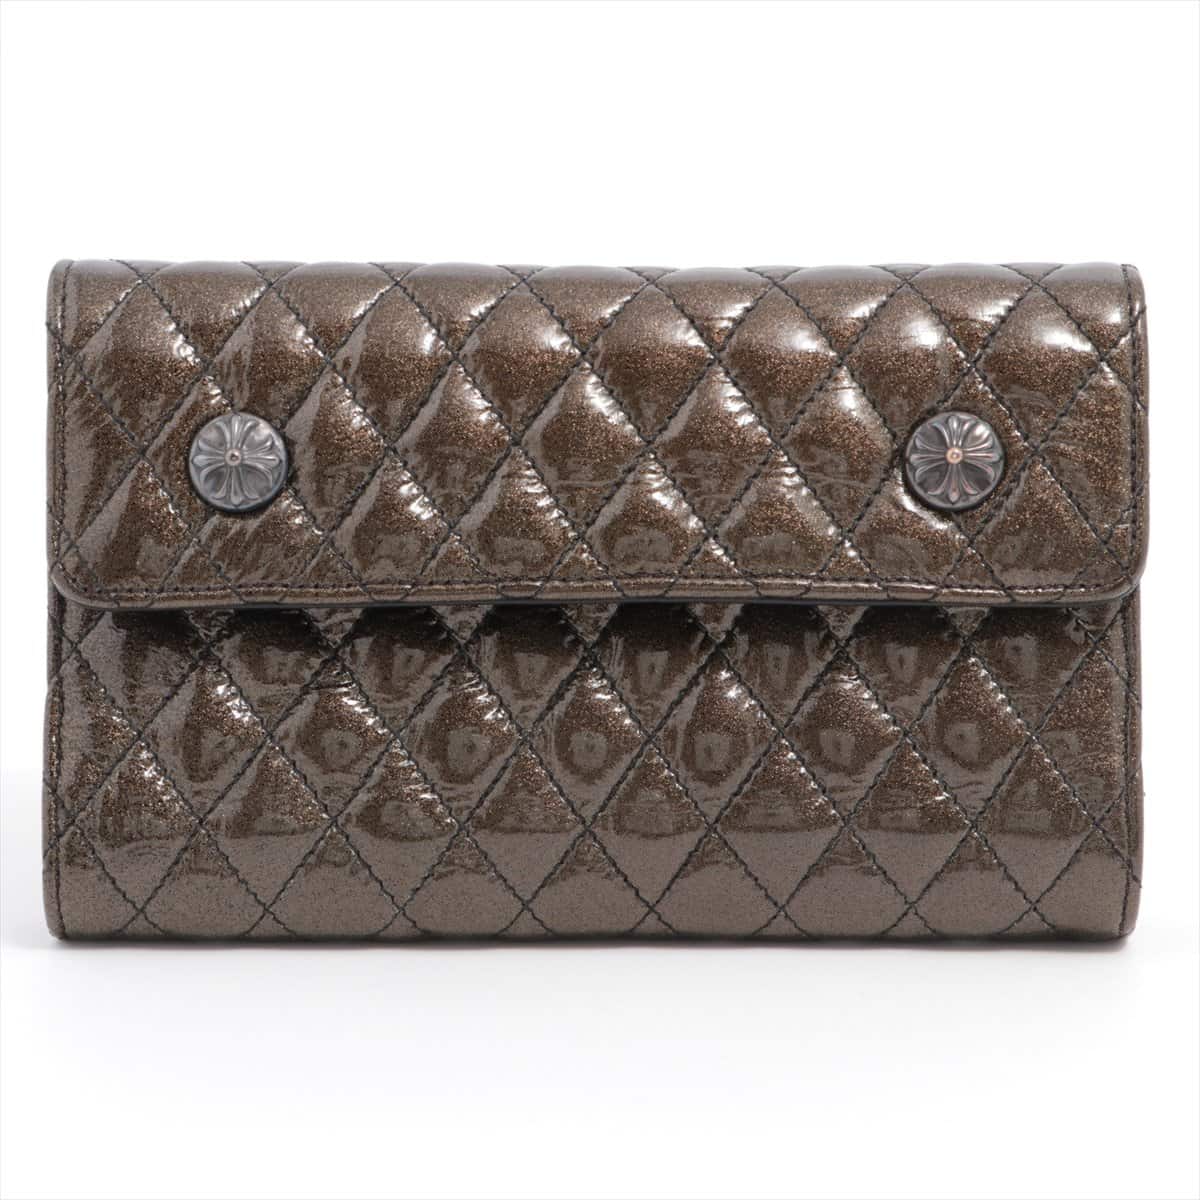 Chrome Hearts CH Cross Clutch bag Patent leather With invoice WAVE4 QLT GLS MTLC Gold series quilting